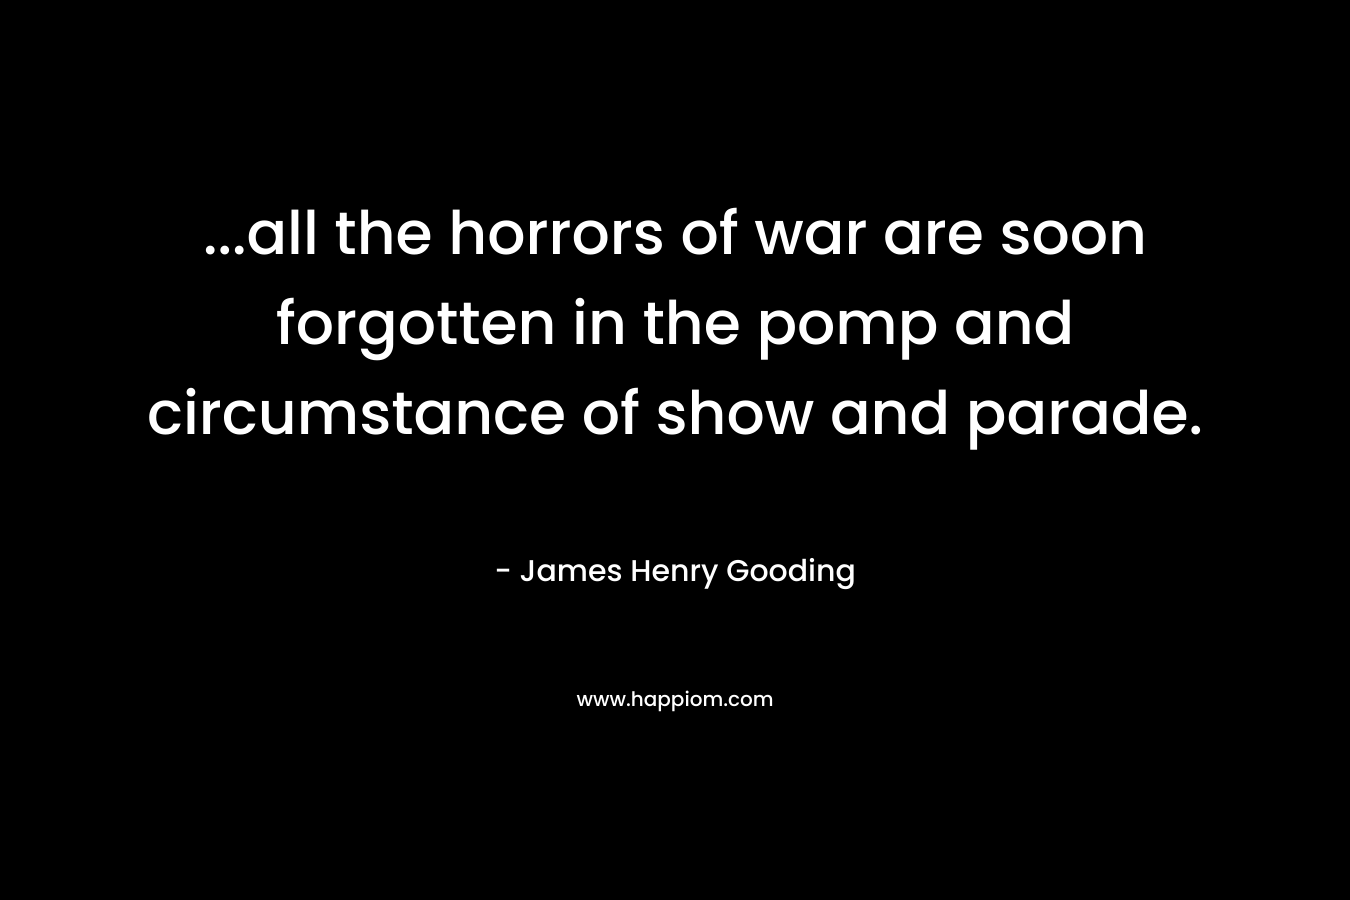 …all the horrors of war are soon forgotten in the pomp and circumstance of show and parade. – James Henry Gooding